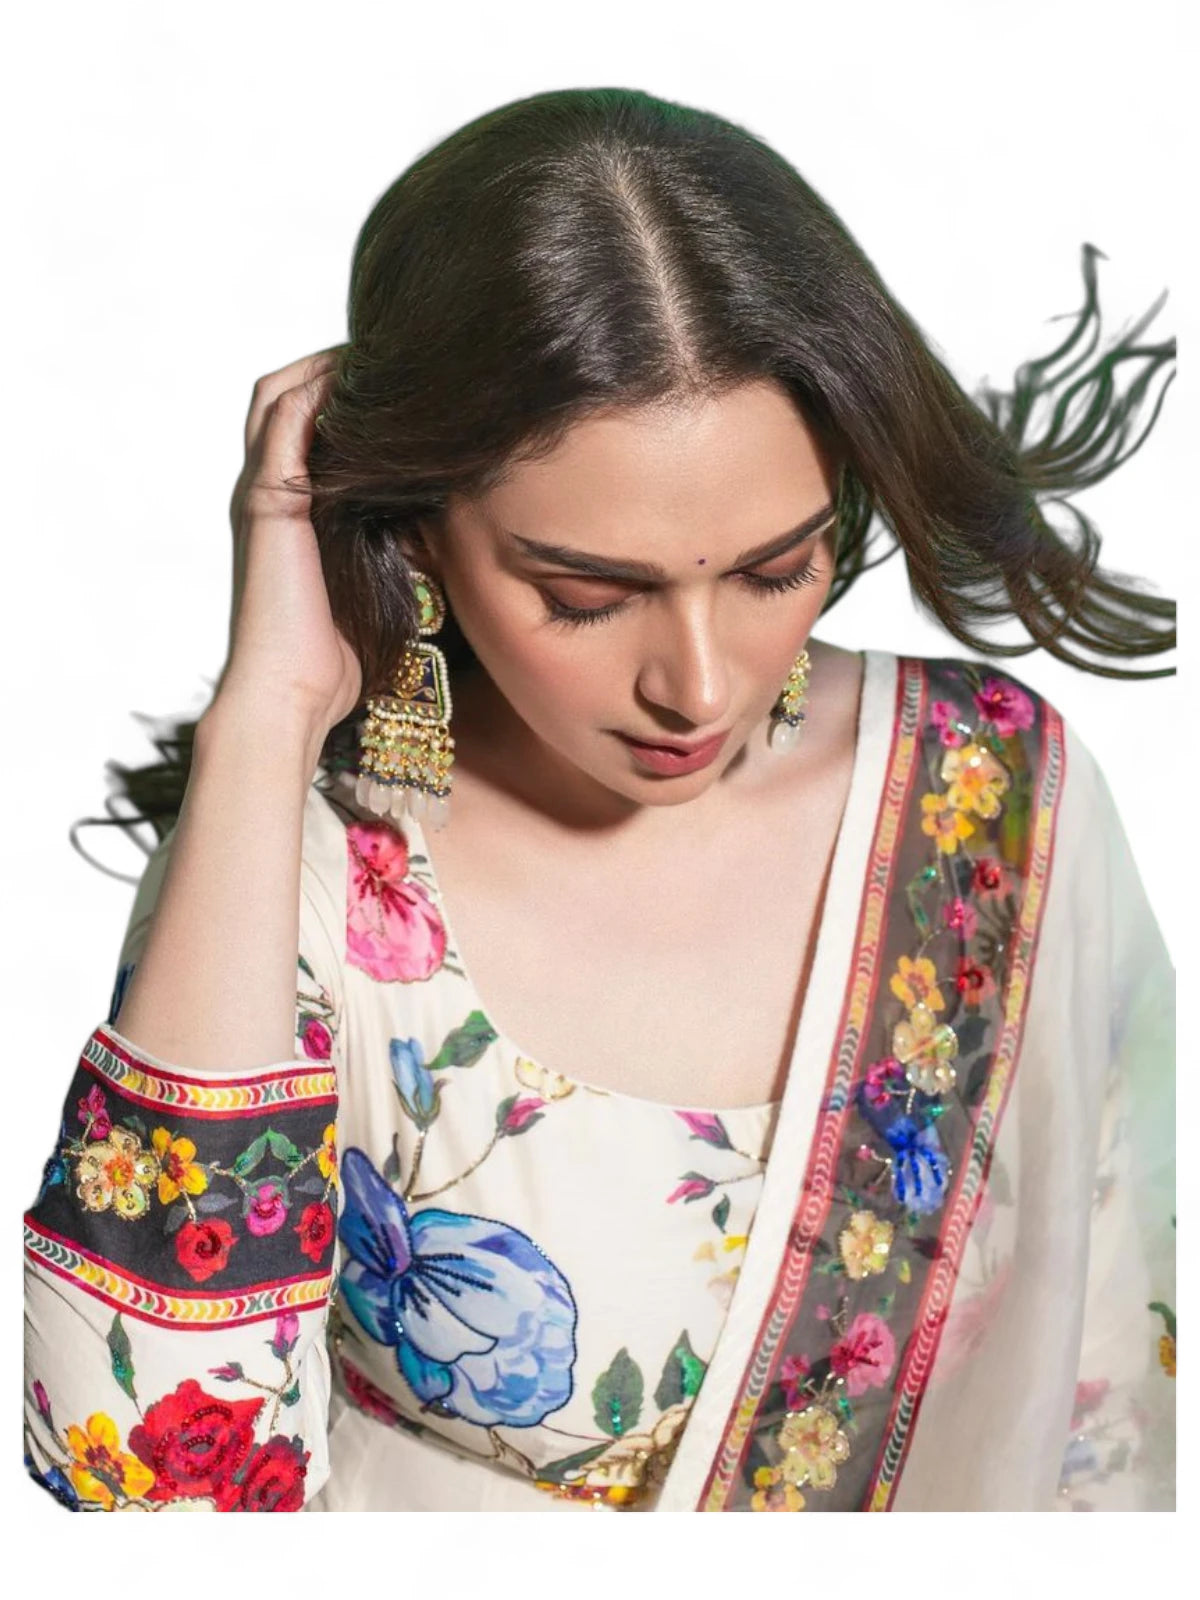 Aditi rao cotton floral printed long anarkali suit gown